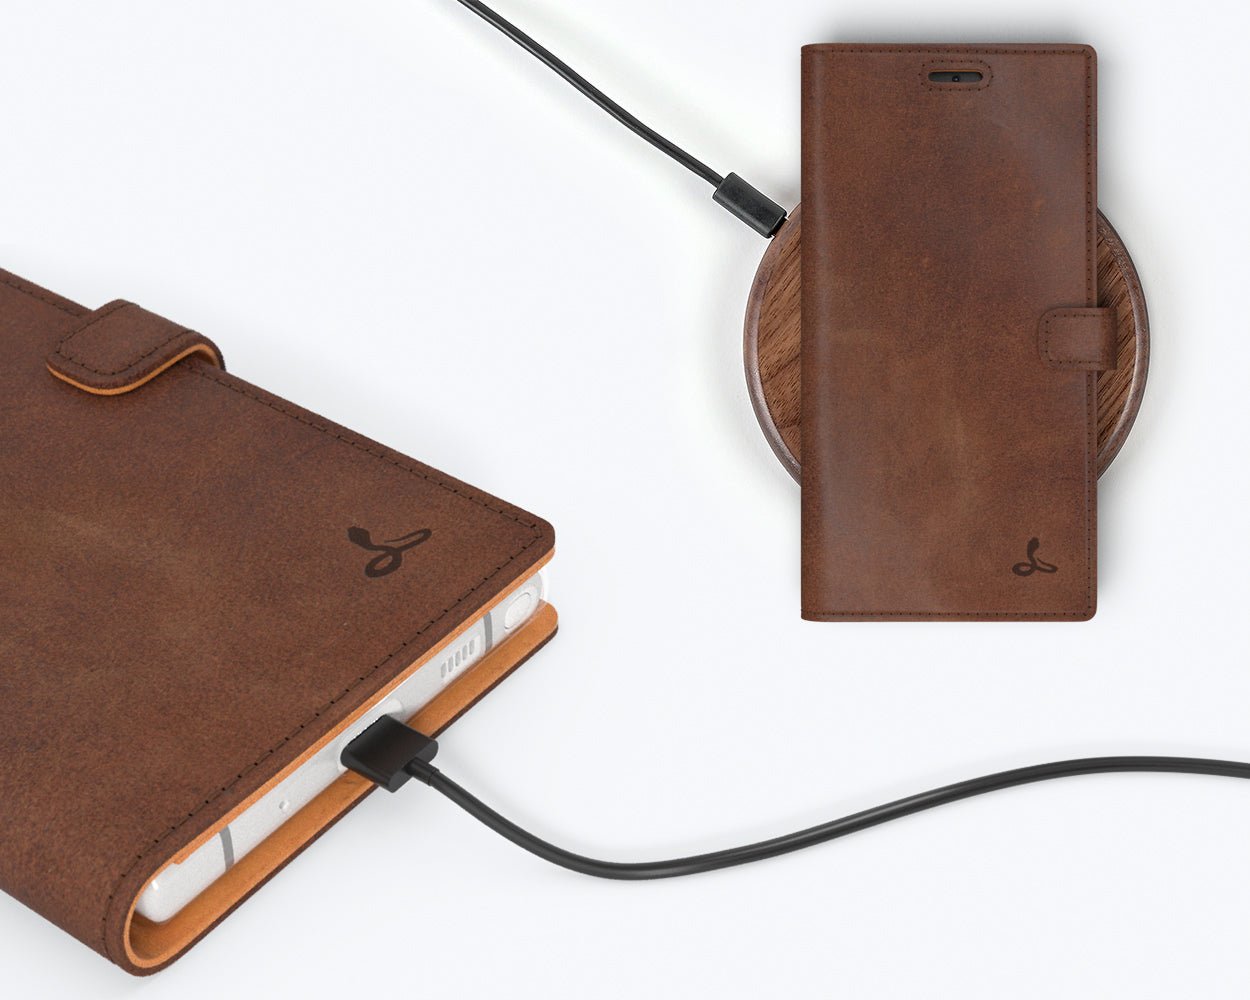 Vintage Leather Wallet - Samsung Galaxy Note 10 Plus Plum Samsung Galaxy Note 10 Plus - Snakehive UK